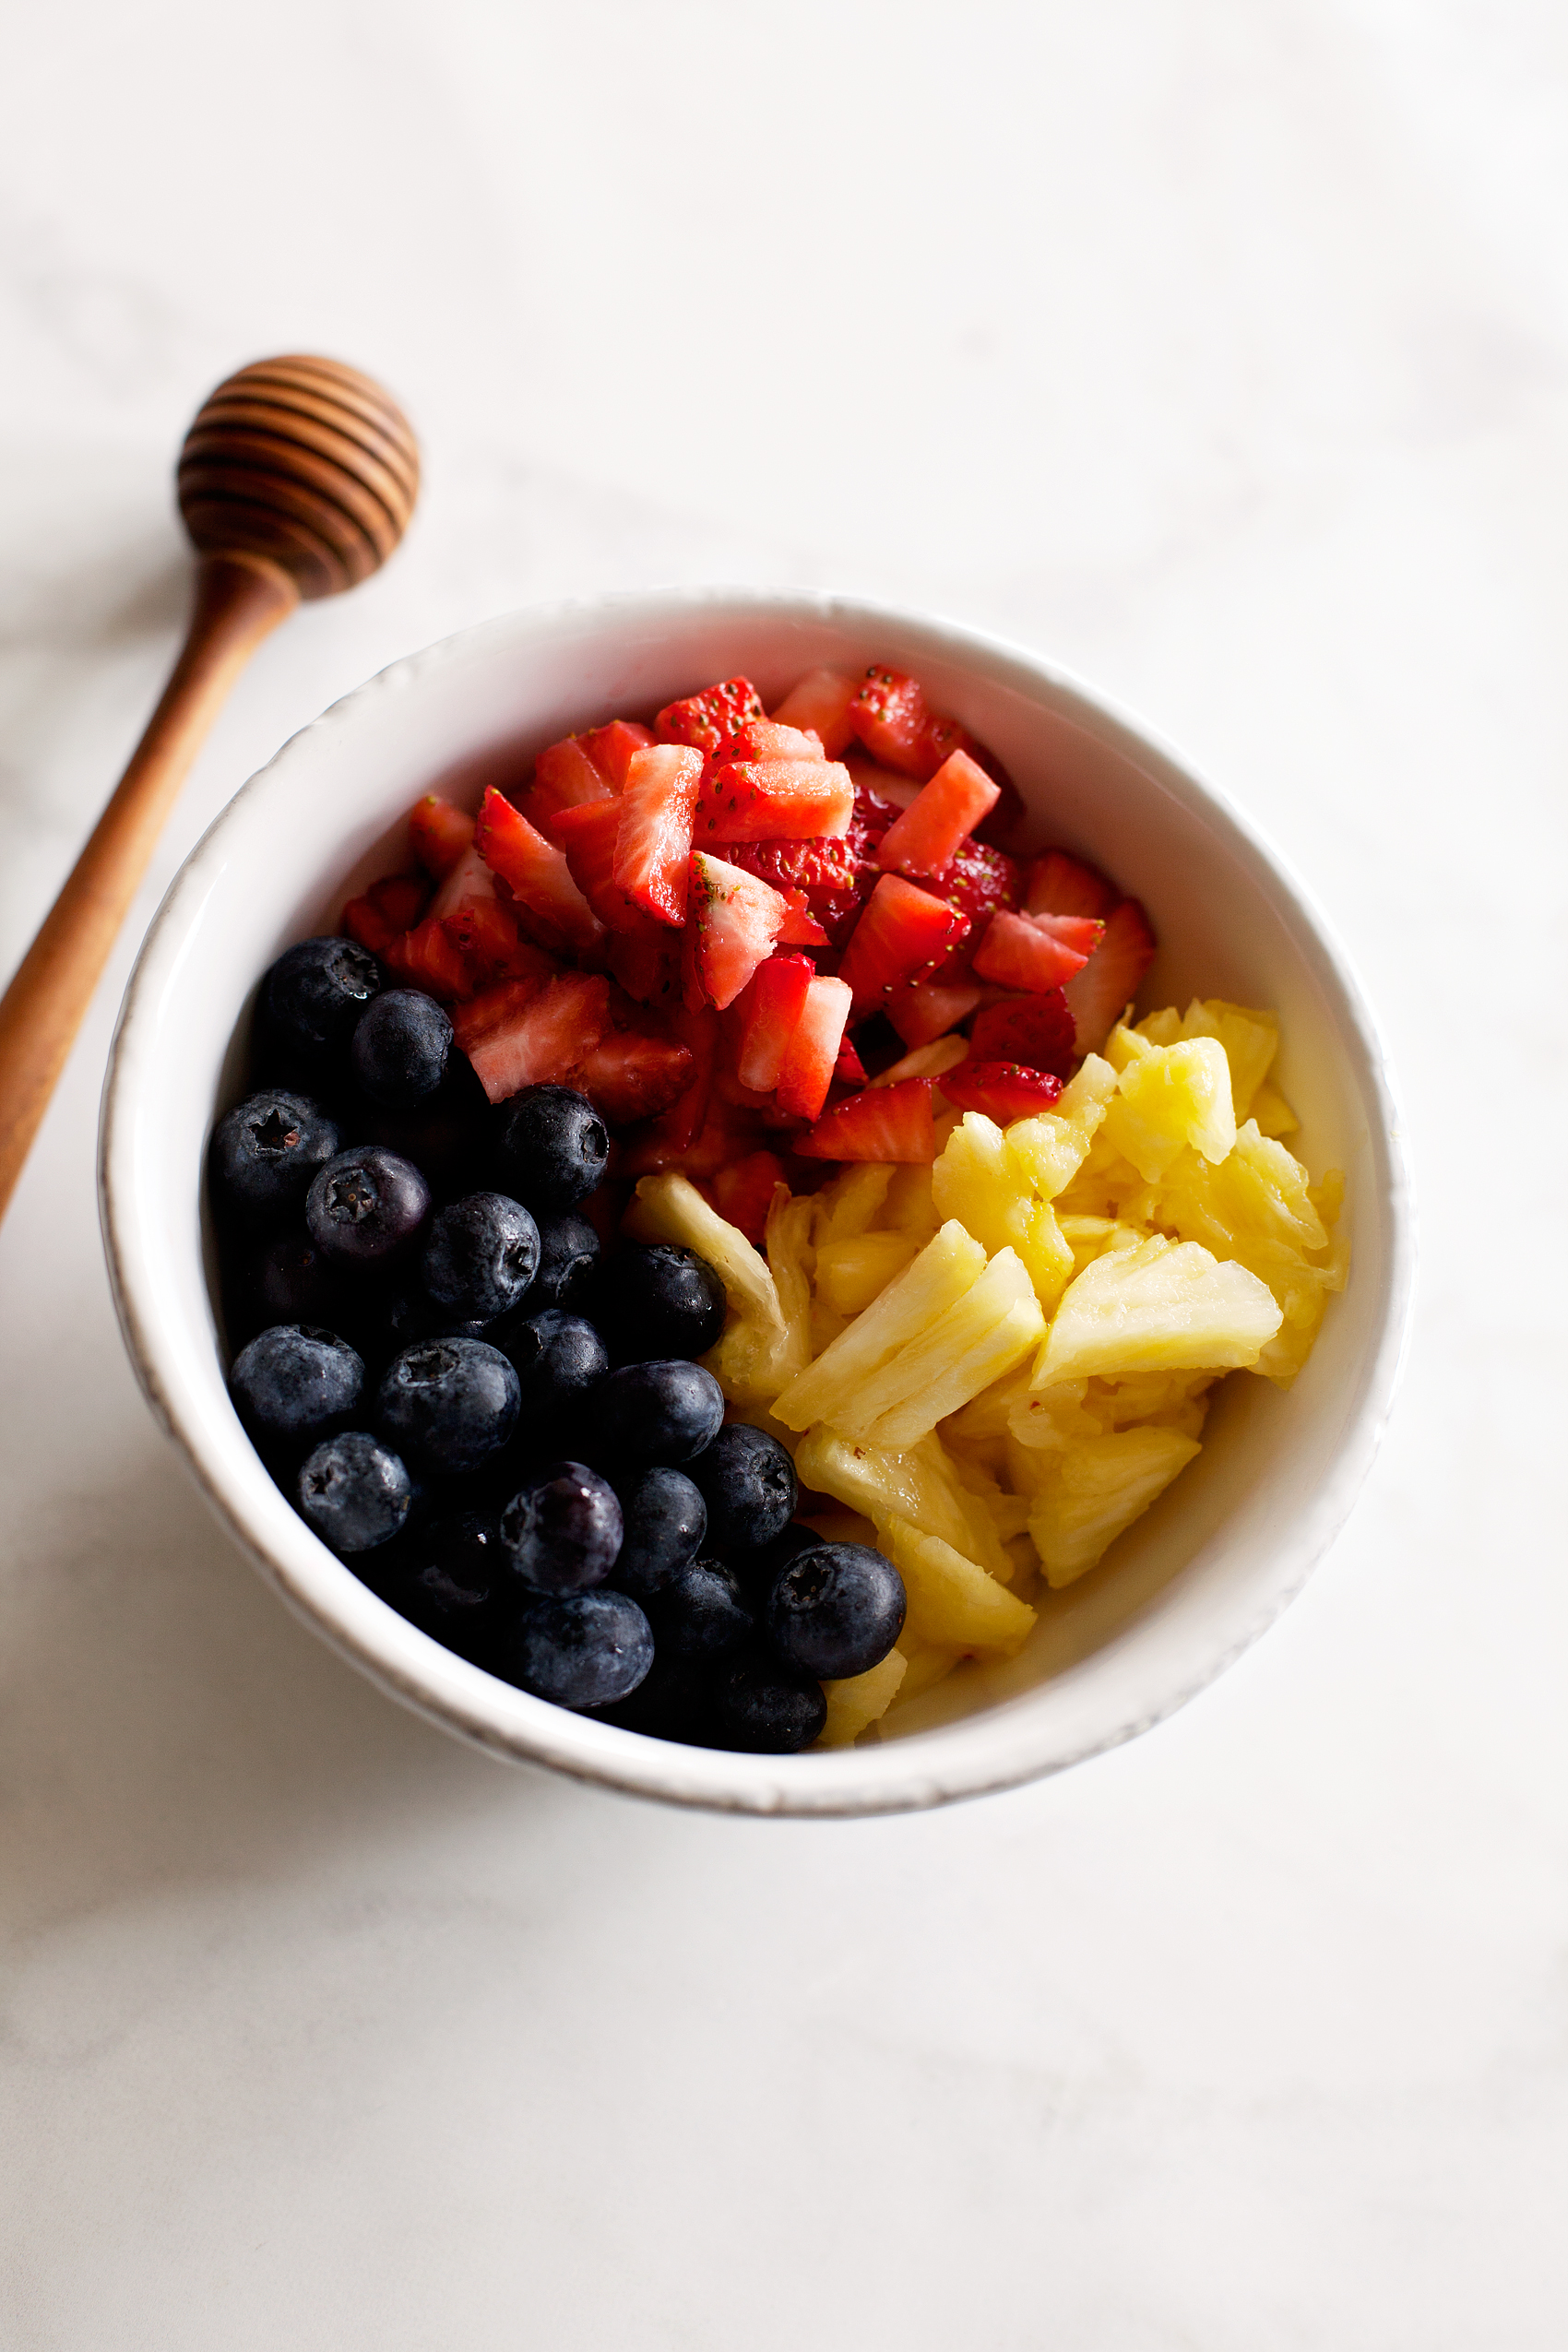 Diced fruit for Pineapple Salsa by WhipperBerry via The Idea Room